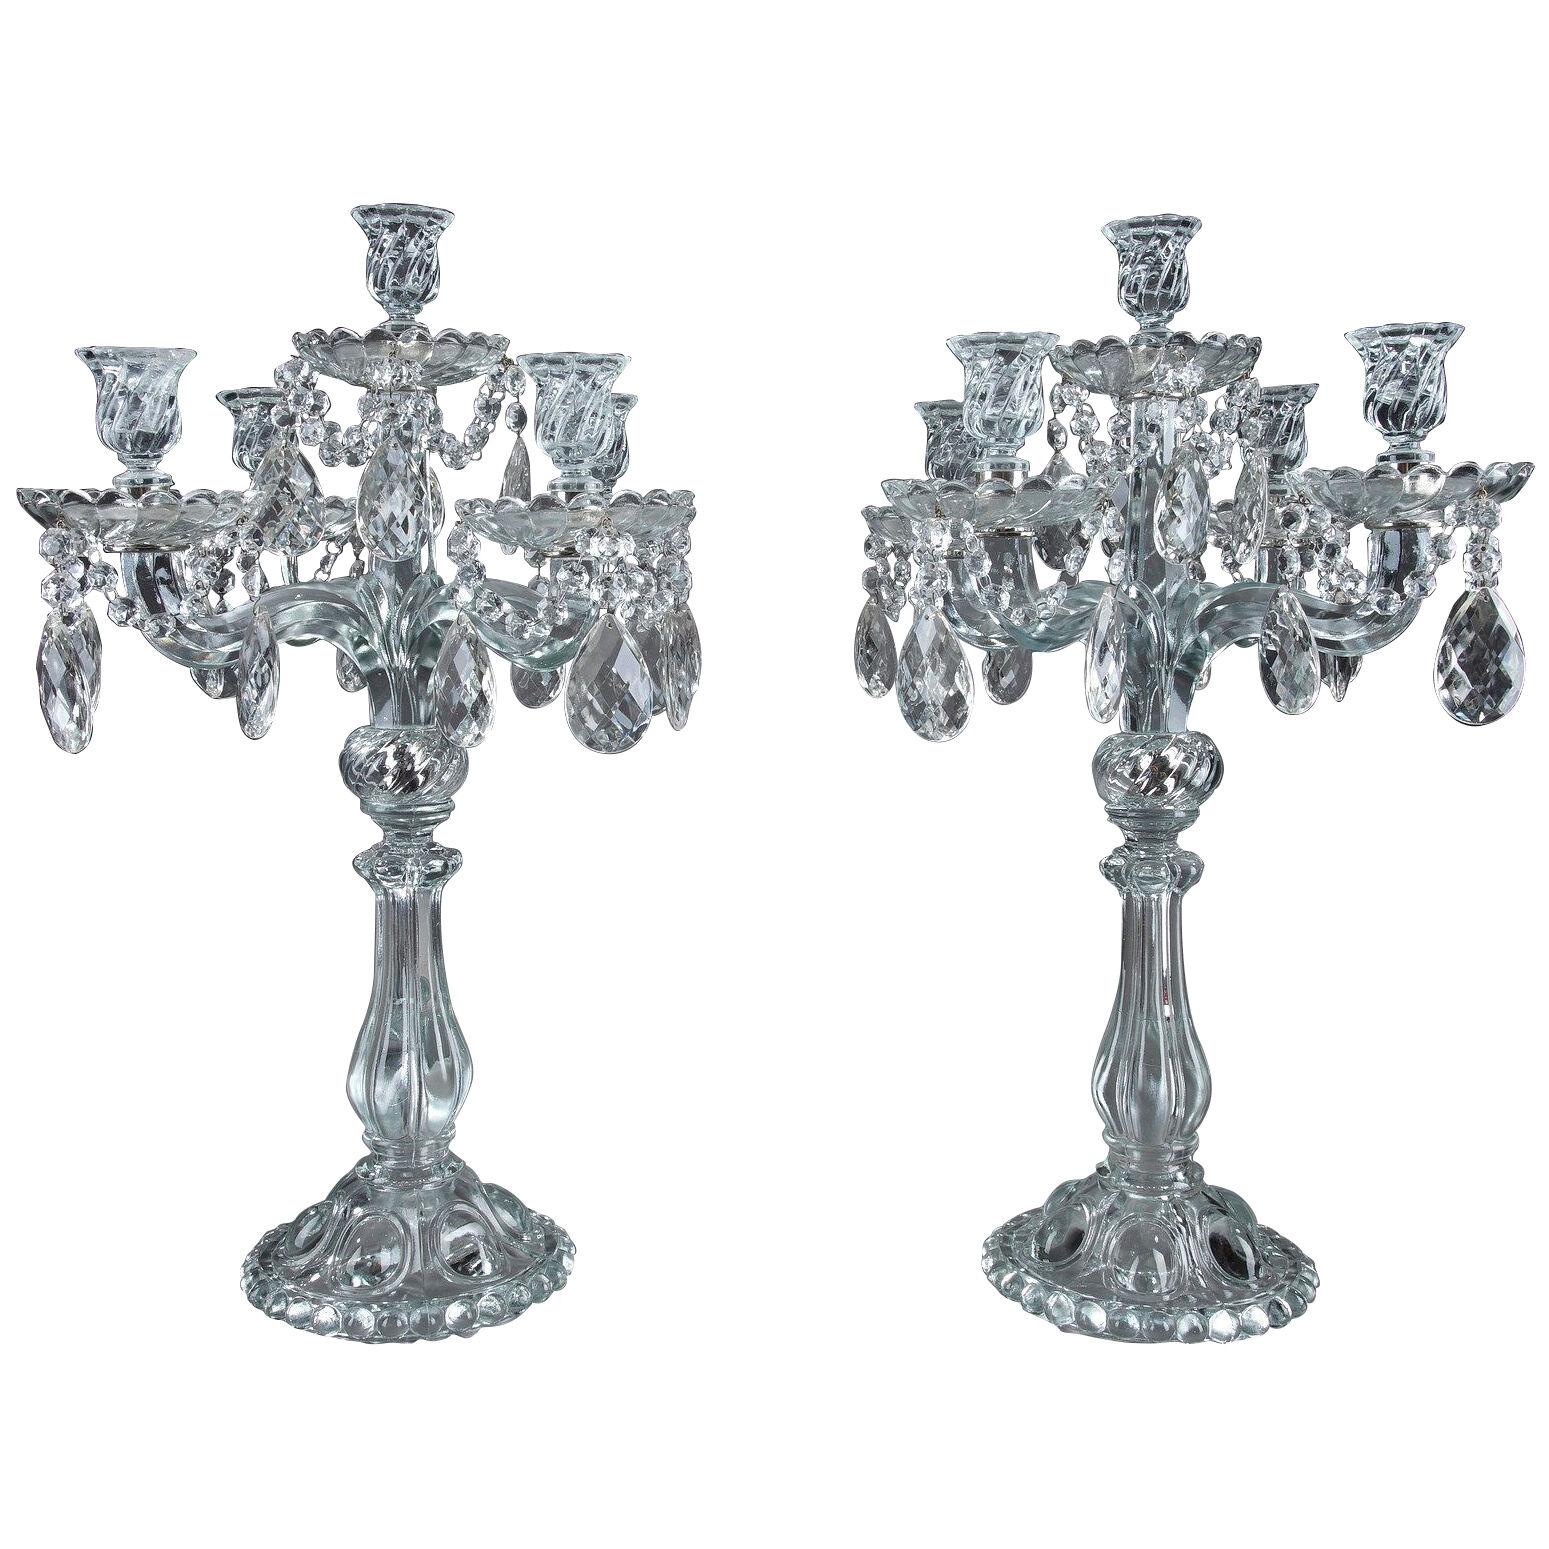 Pair of glass candelabras with crystal pendants